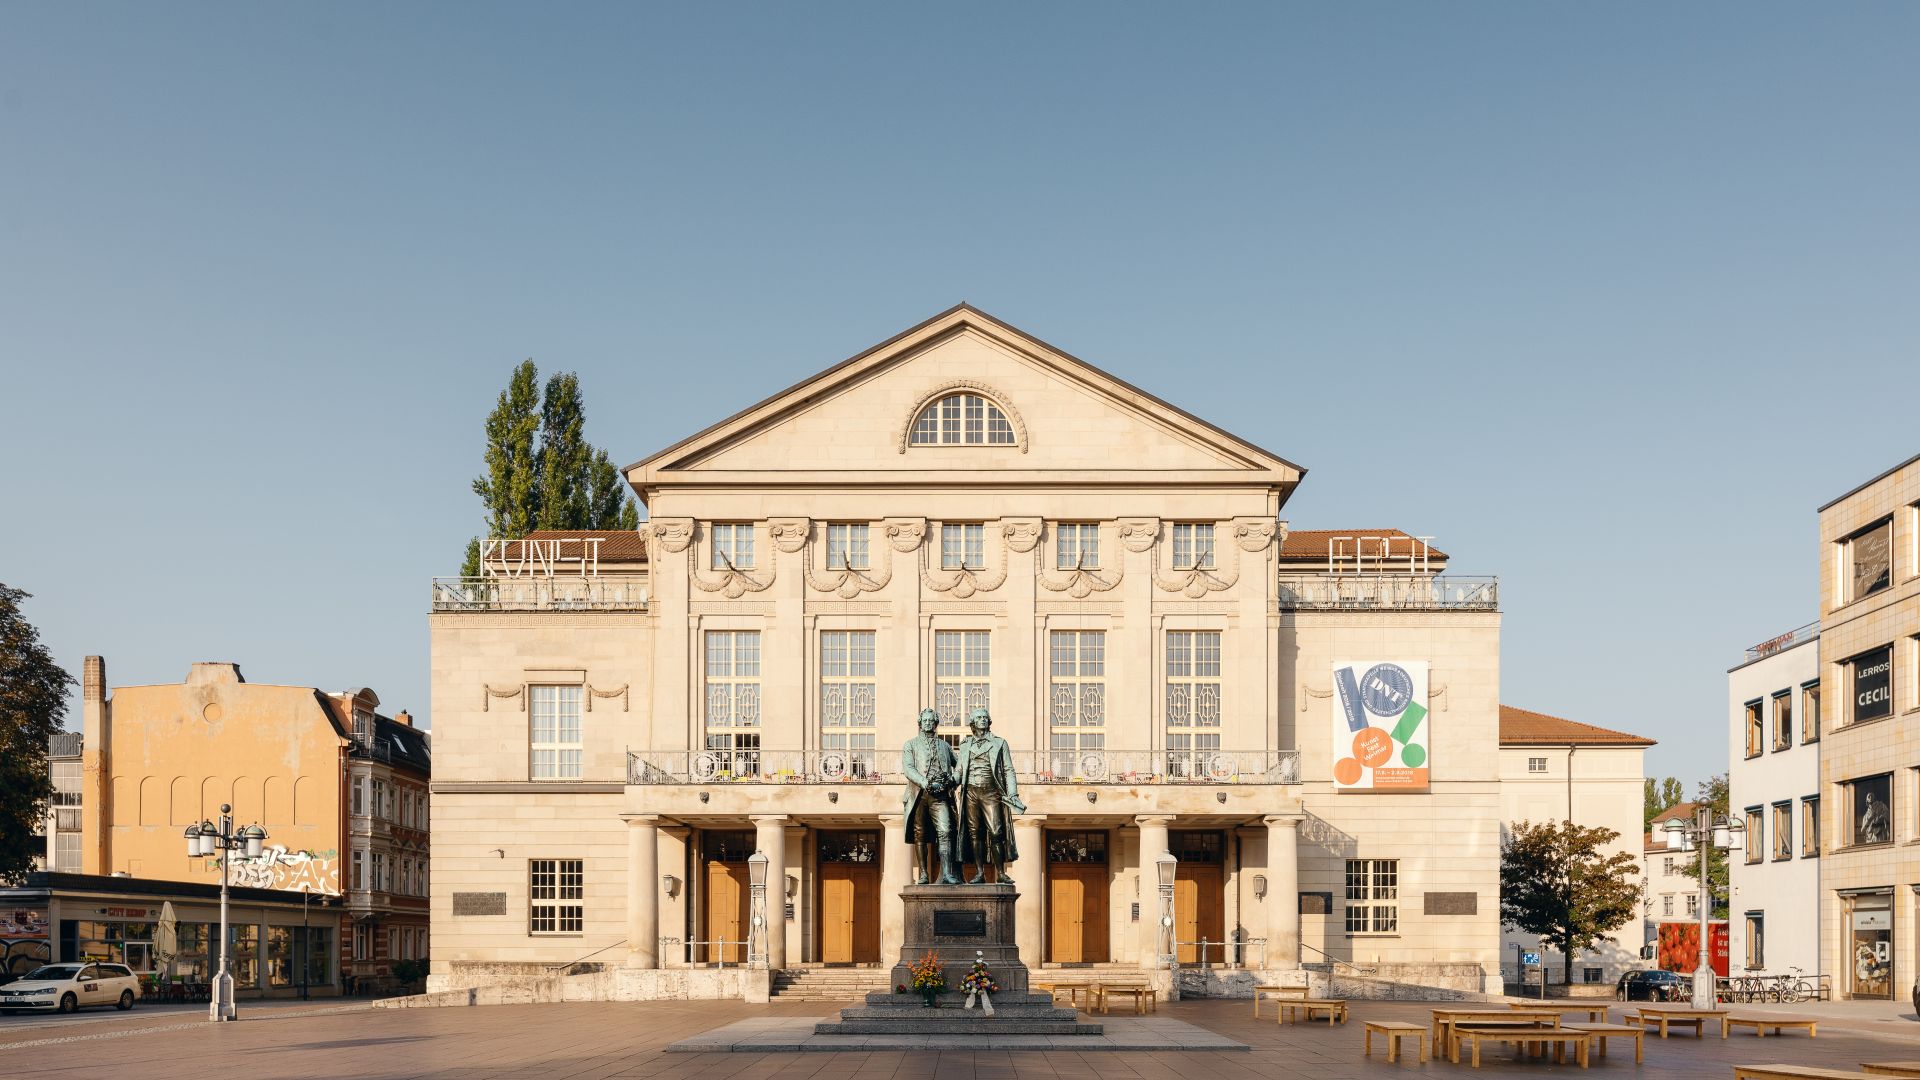 Weimar: View of the German National Theatre with the Goethe Schiller Monument